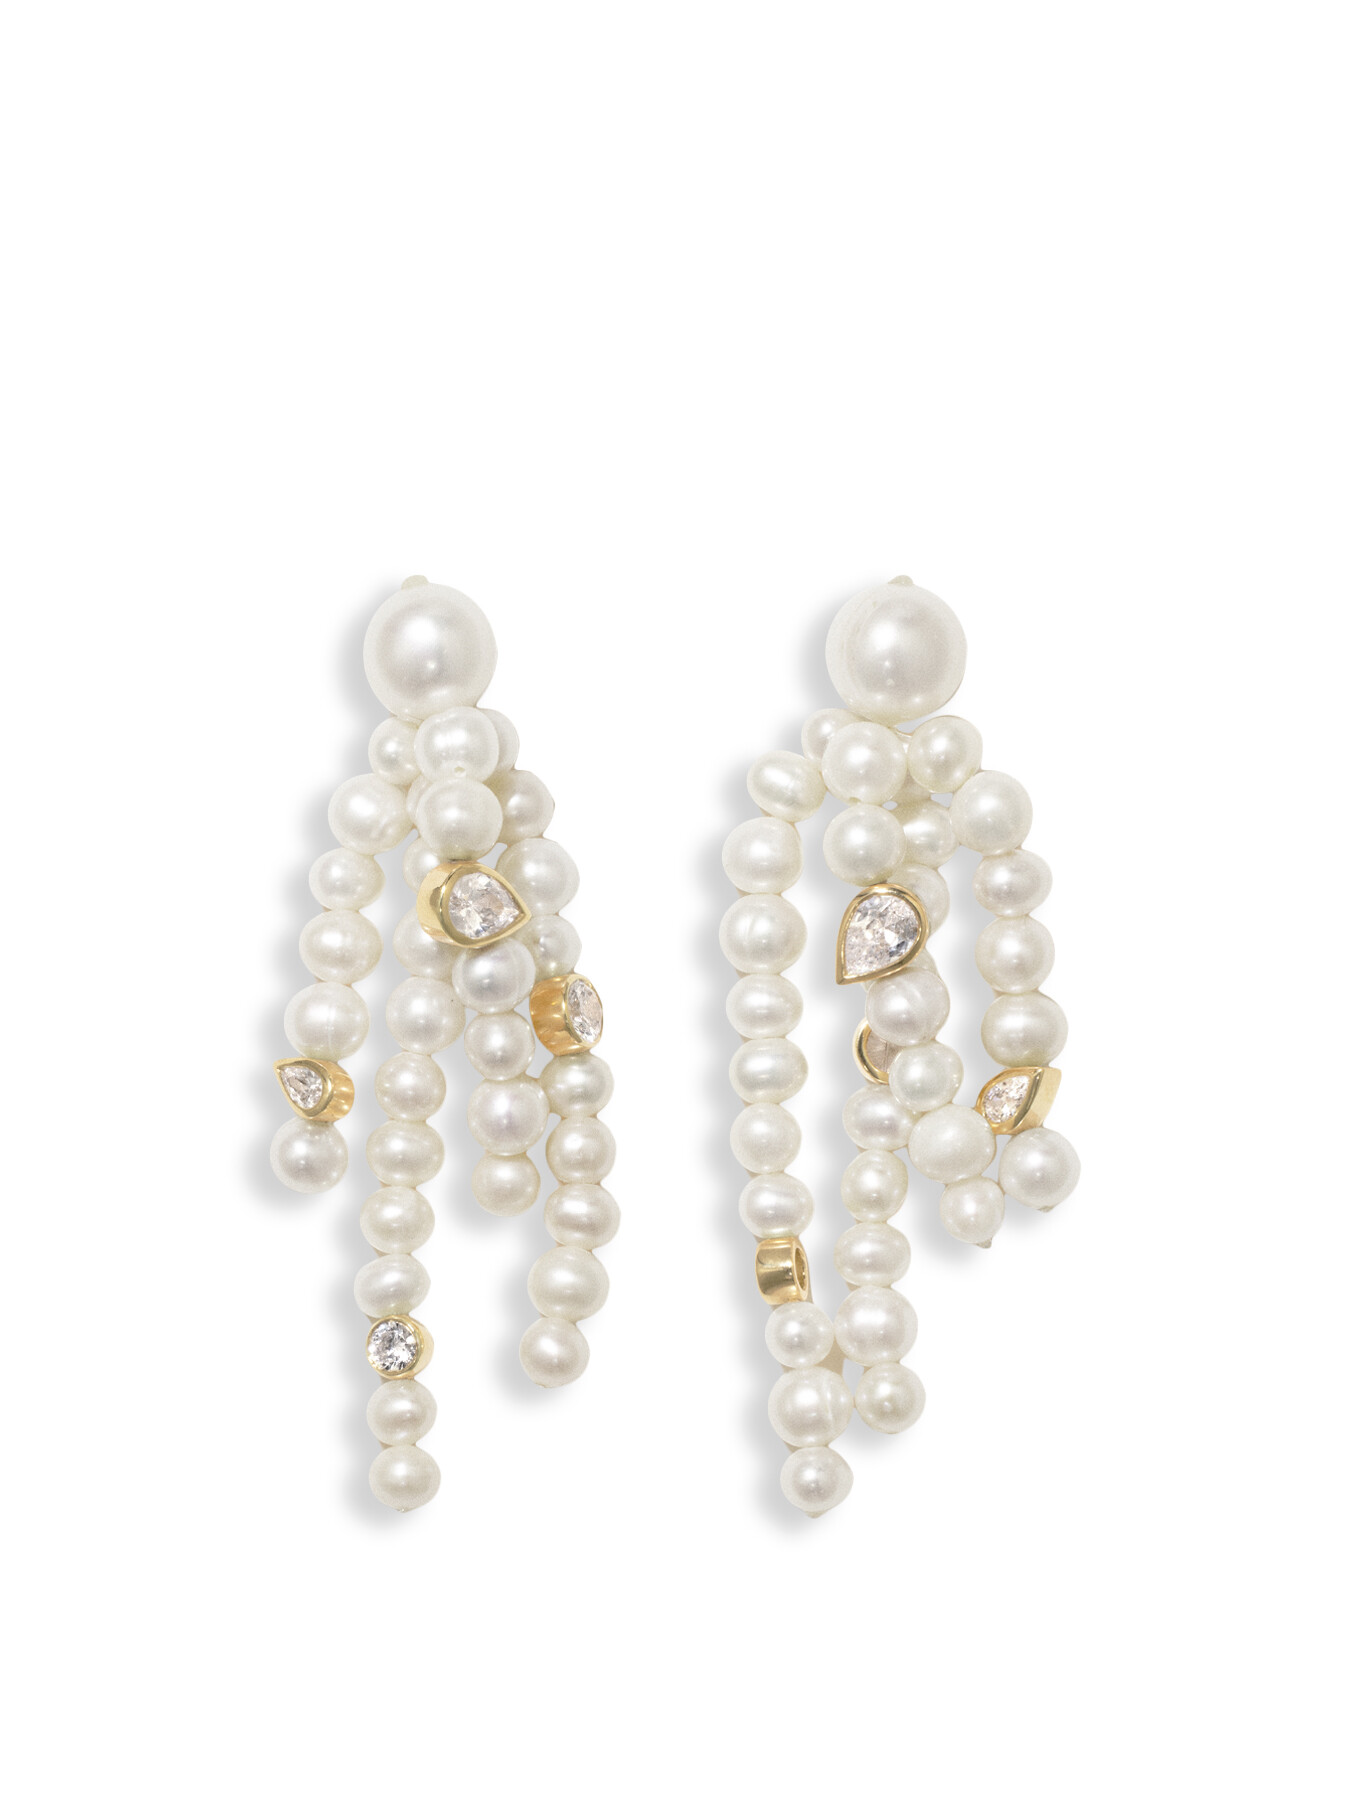 Completedworks Women's Earrings With Cz And Fresh Water Pearls Cream In White